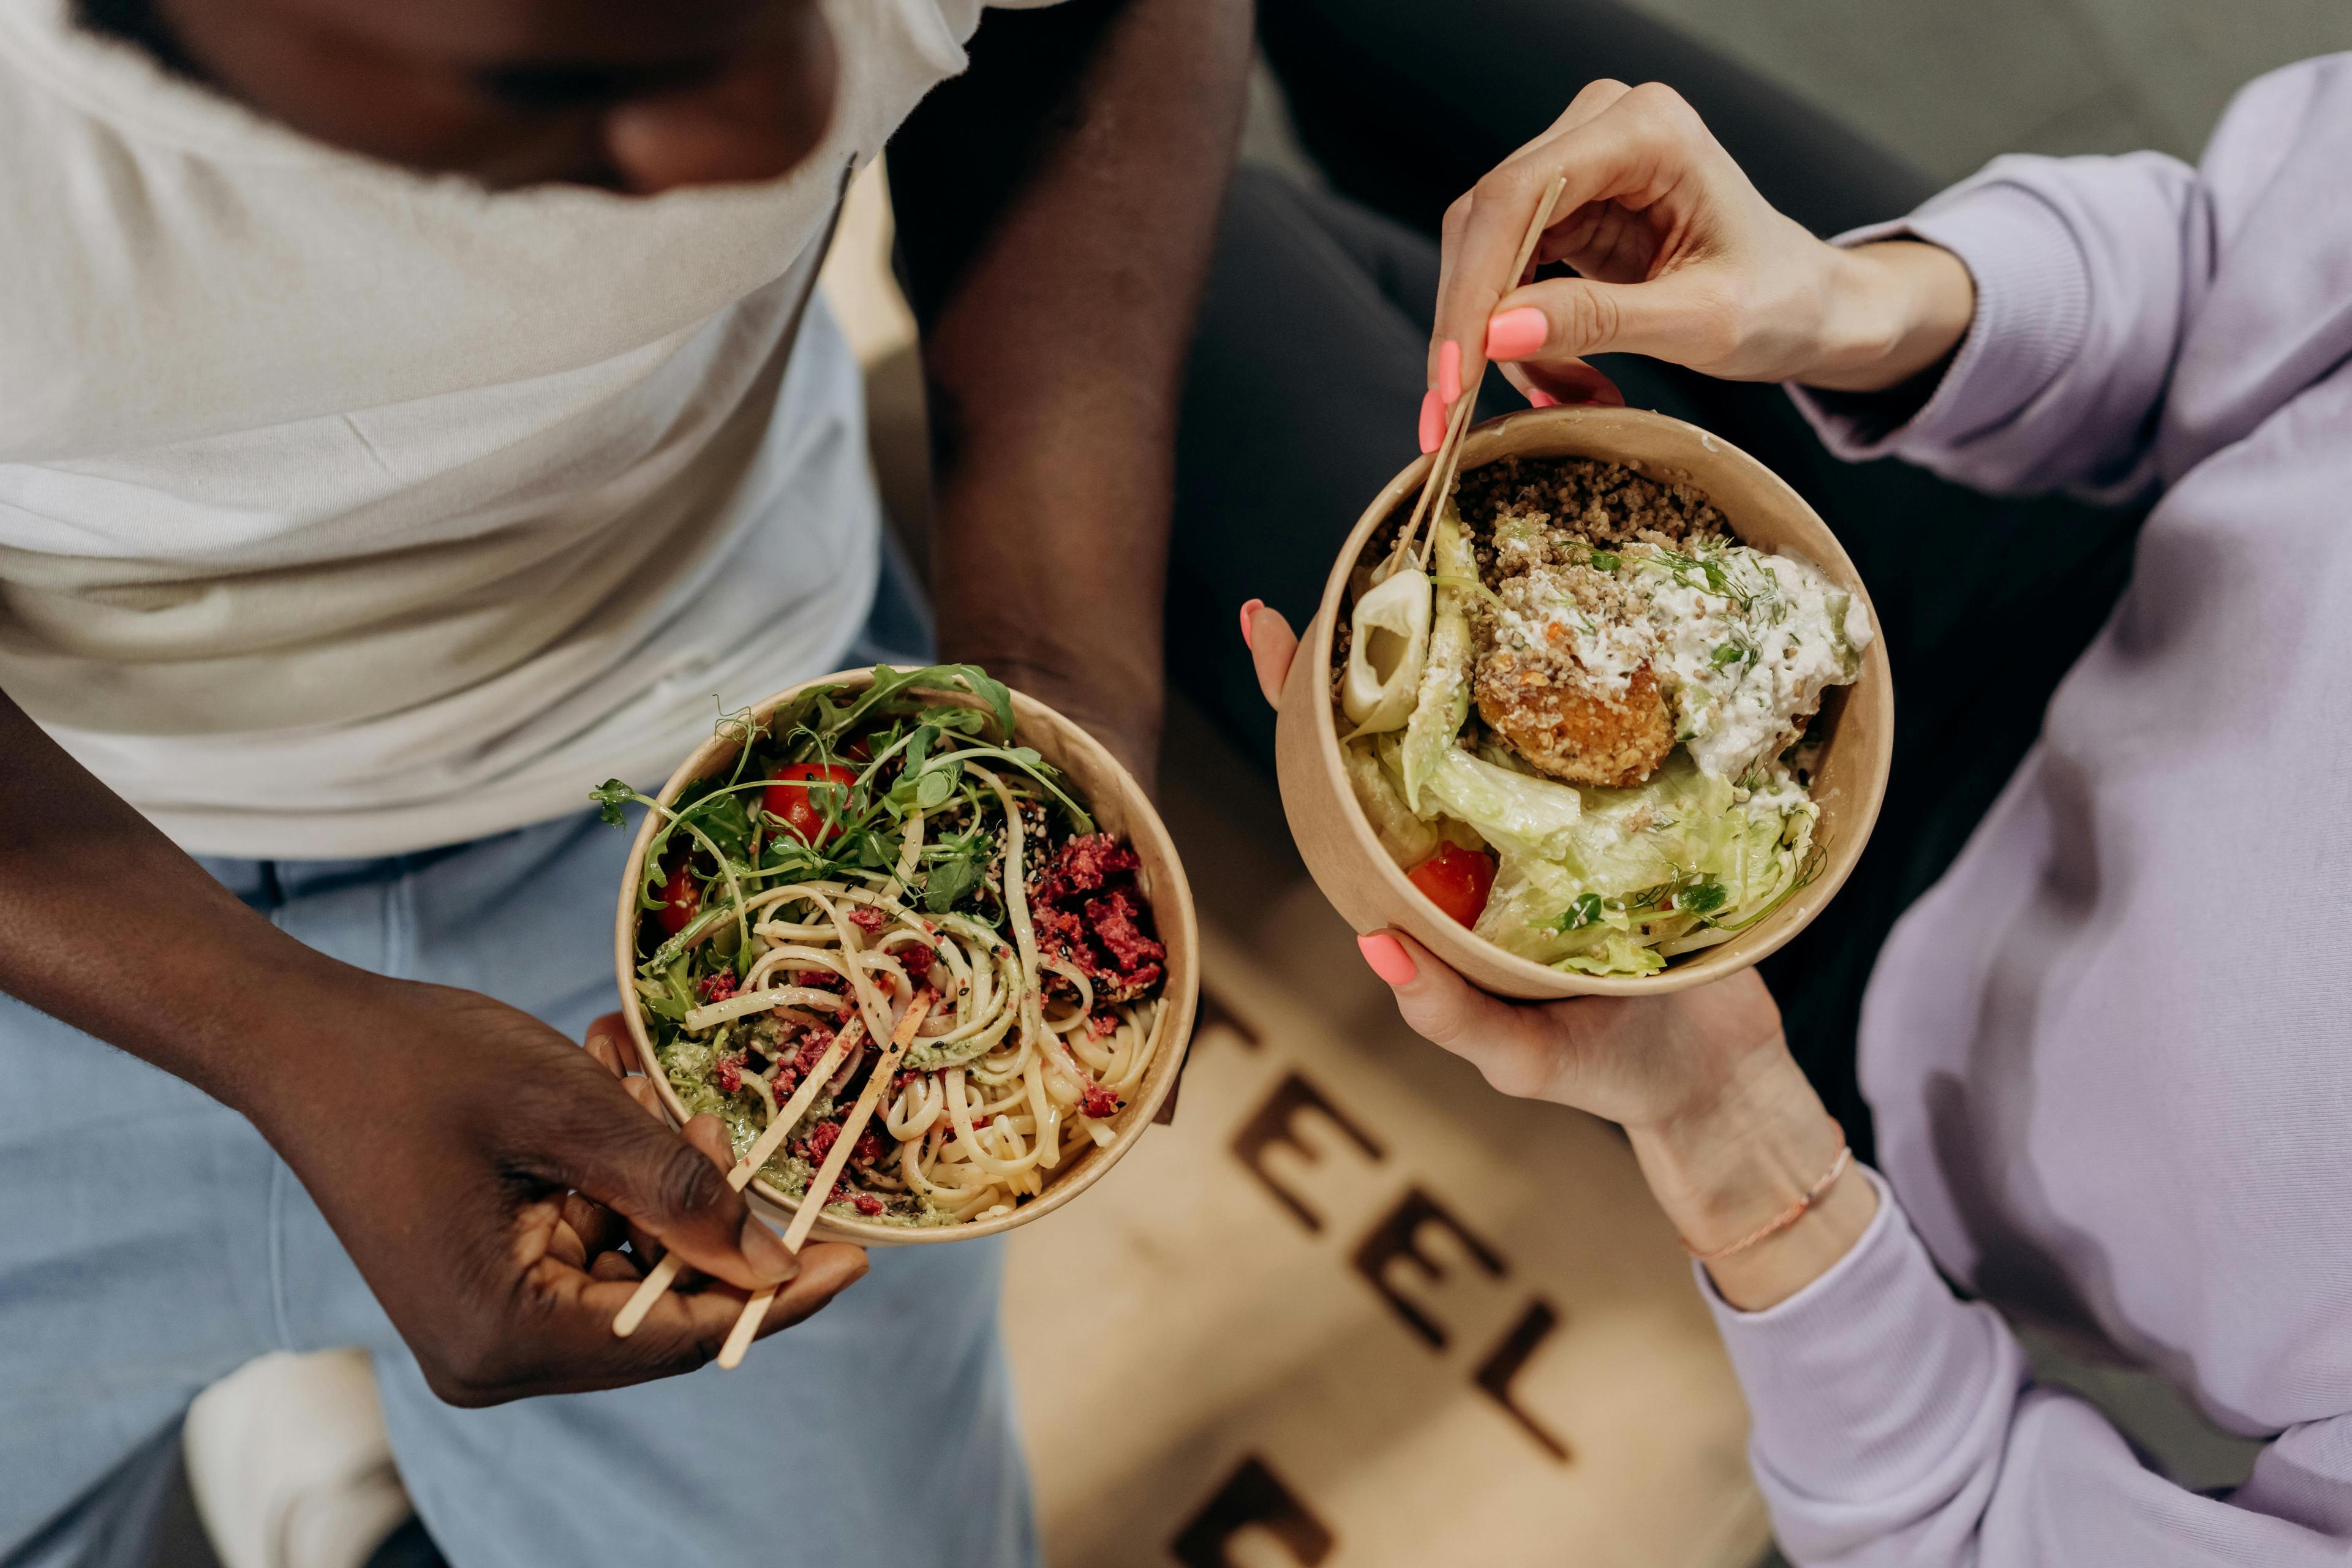 Overhead shot of two people eating bowls of different food in takeout containers